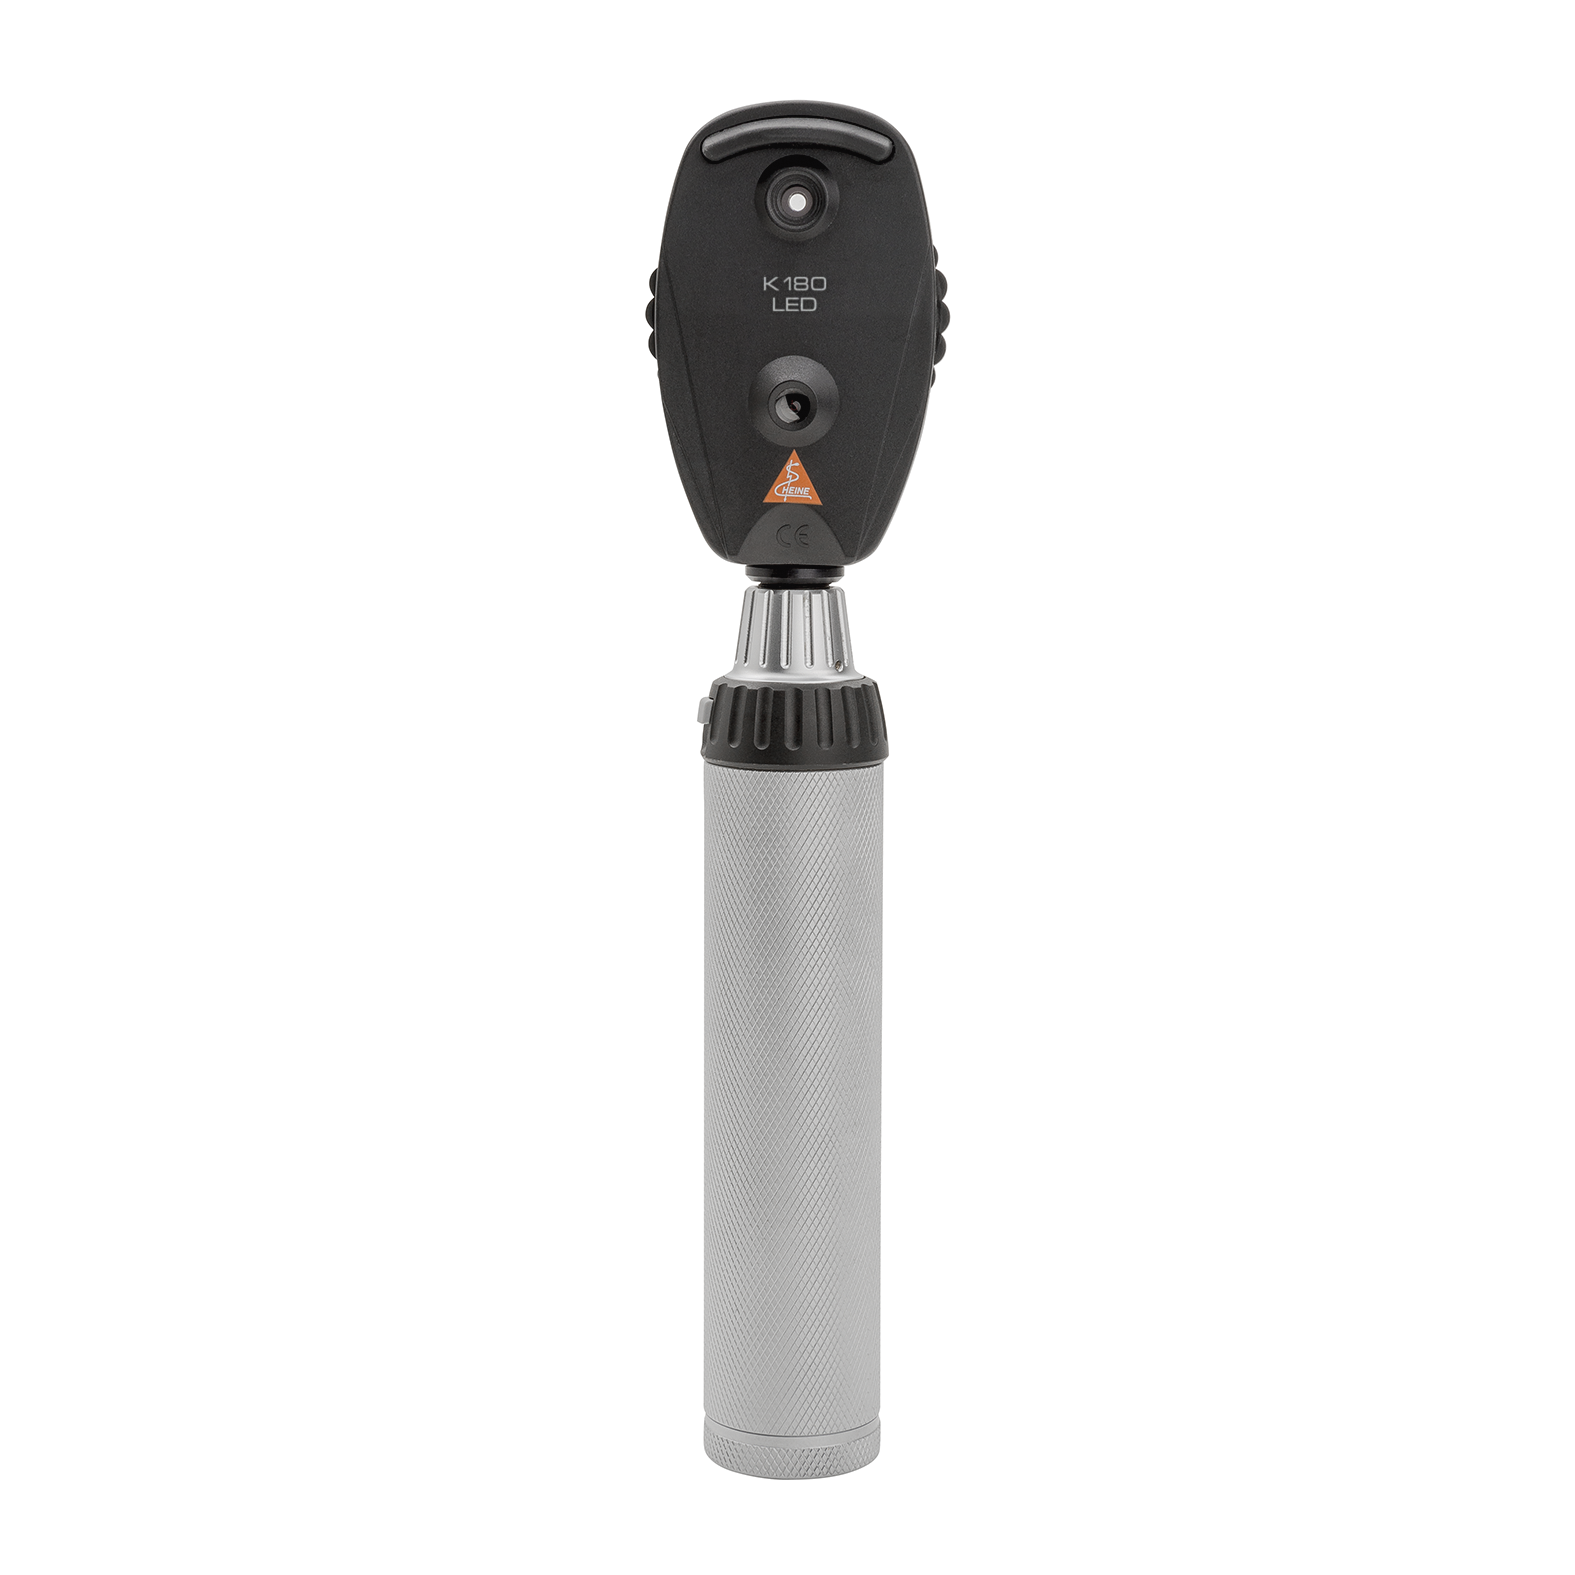 HEINE K180 LED Ophthalmoscope, in standard version with aperture wheel 1, soft pouch, BETA4 USB rechargeable handle with USB cord and plug-in power supply